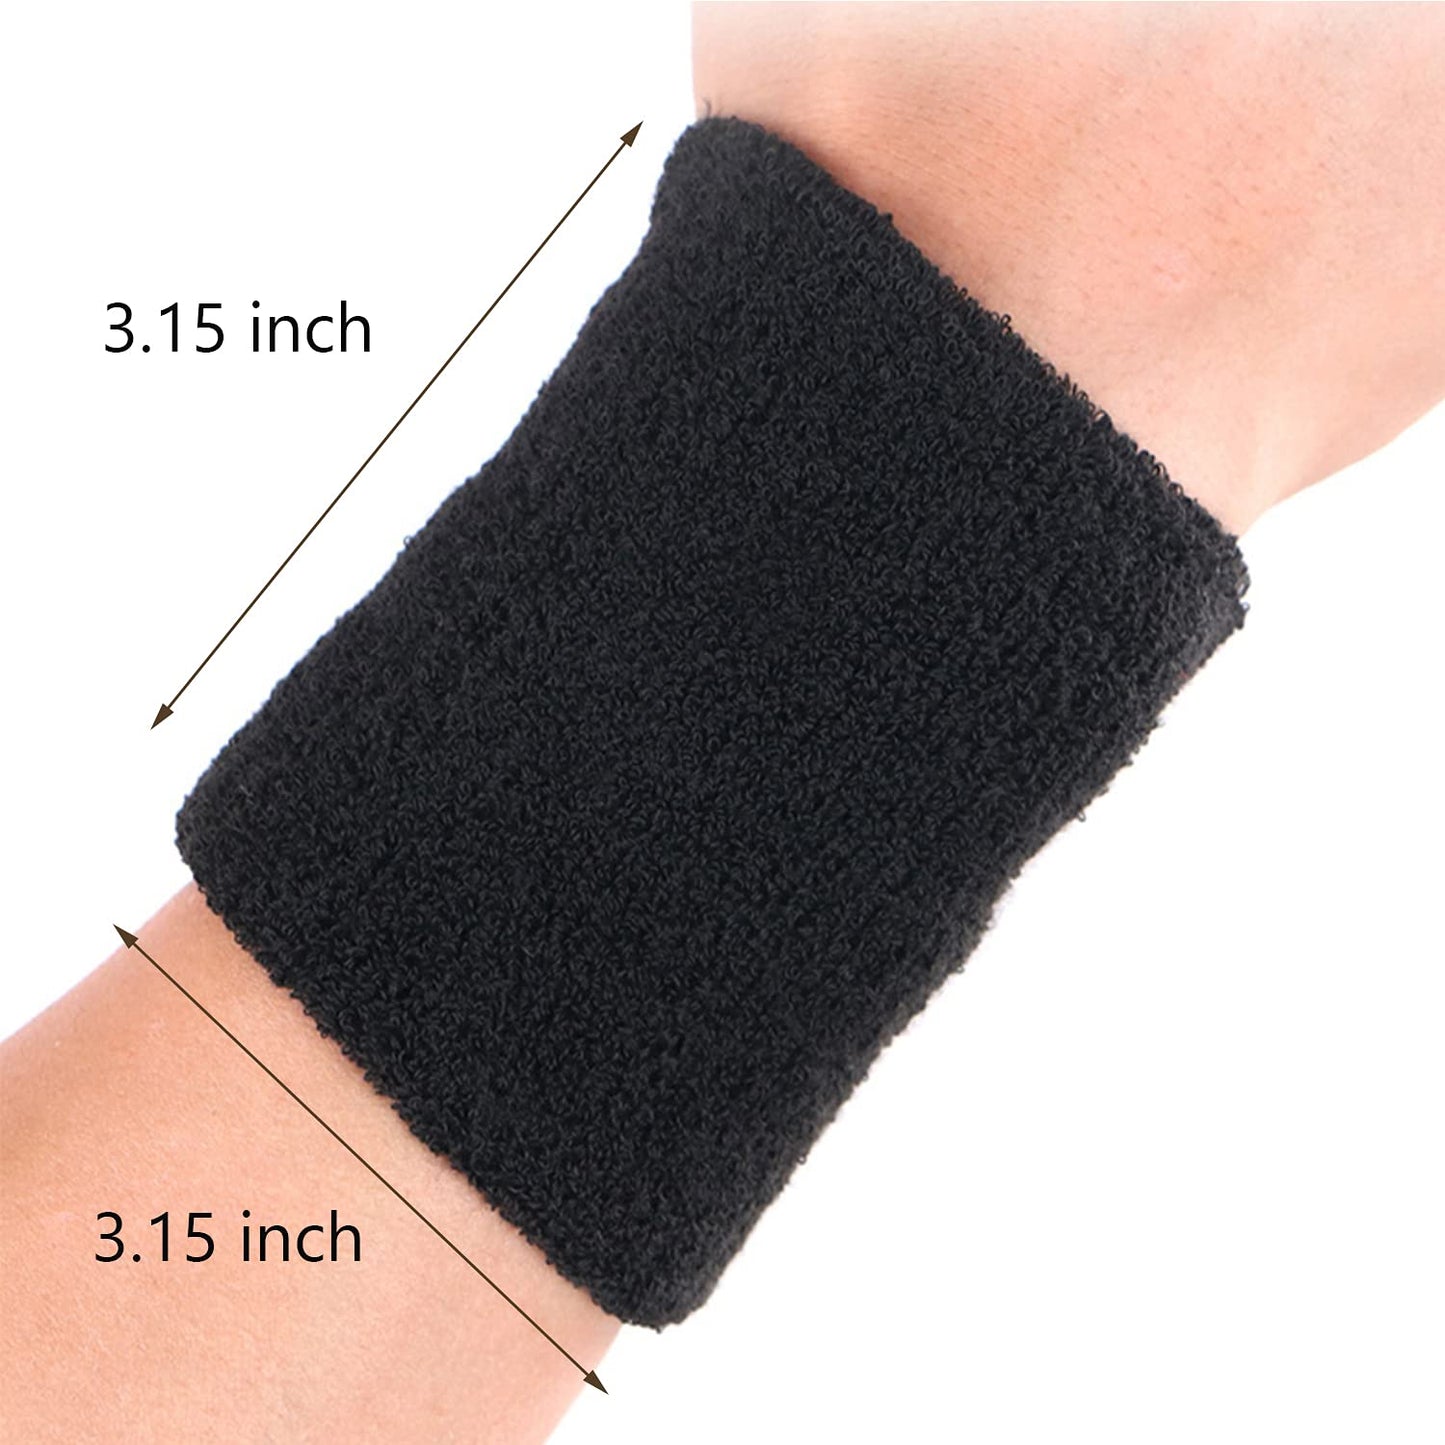 Sports Wristbands Cotton Sweat Bands, for Basketball, Baseball, Running Athletic Sports